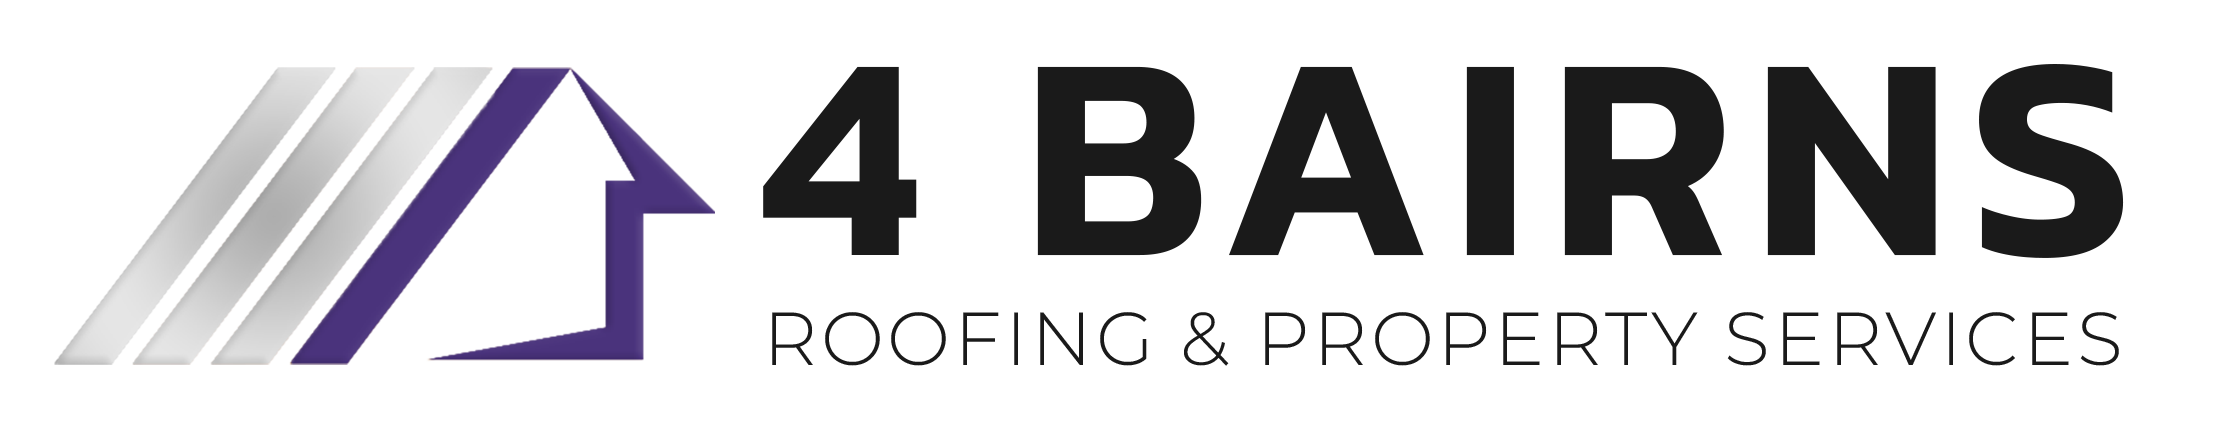 4 Bairns Roofing & Property Services Logo